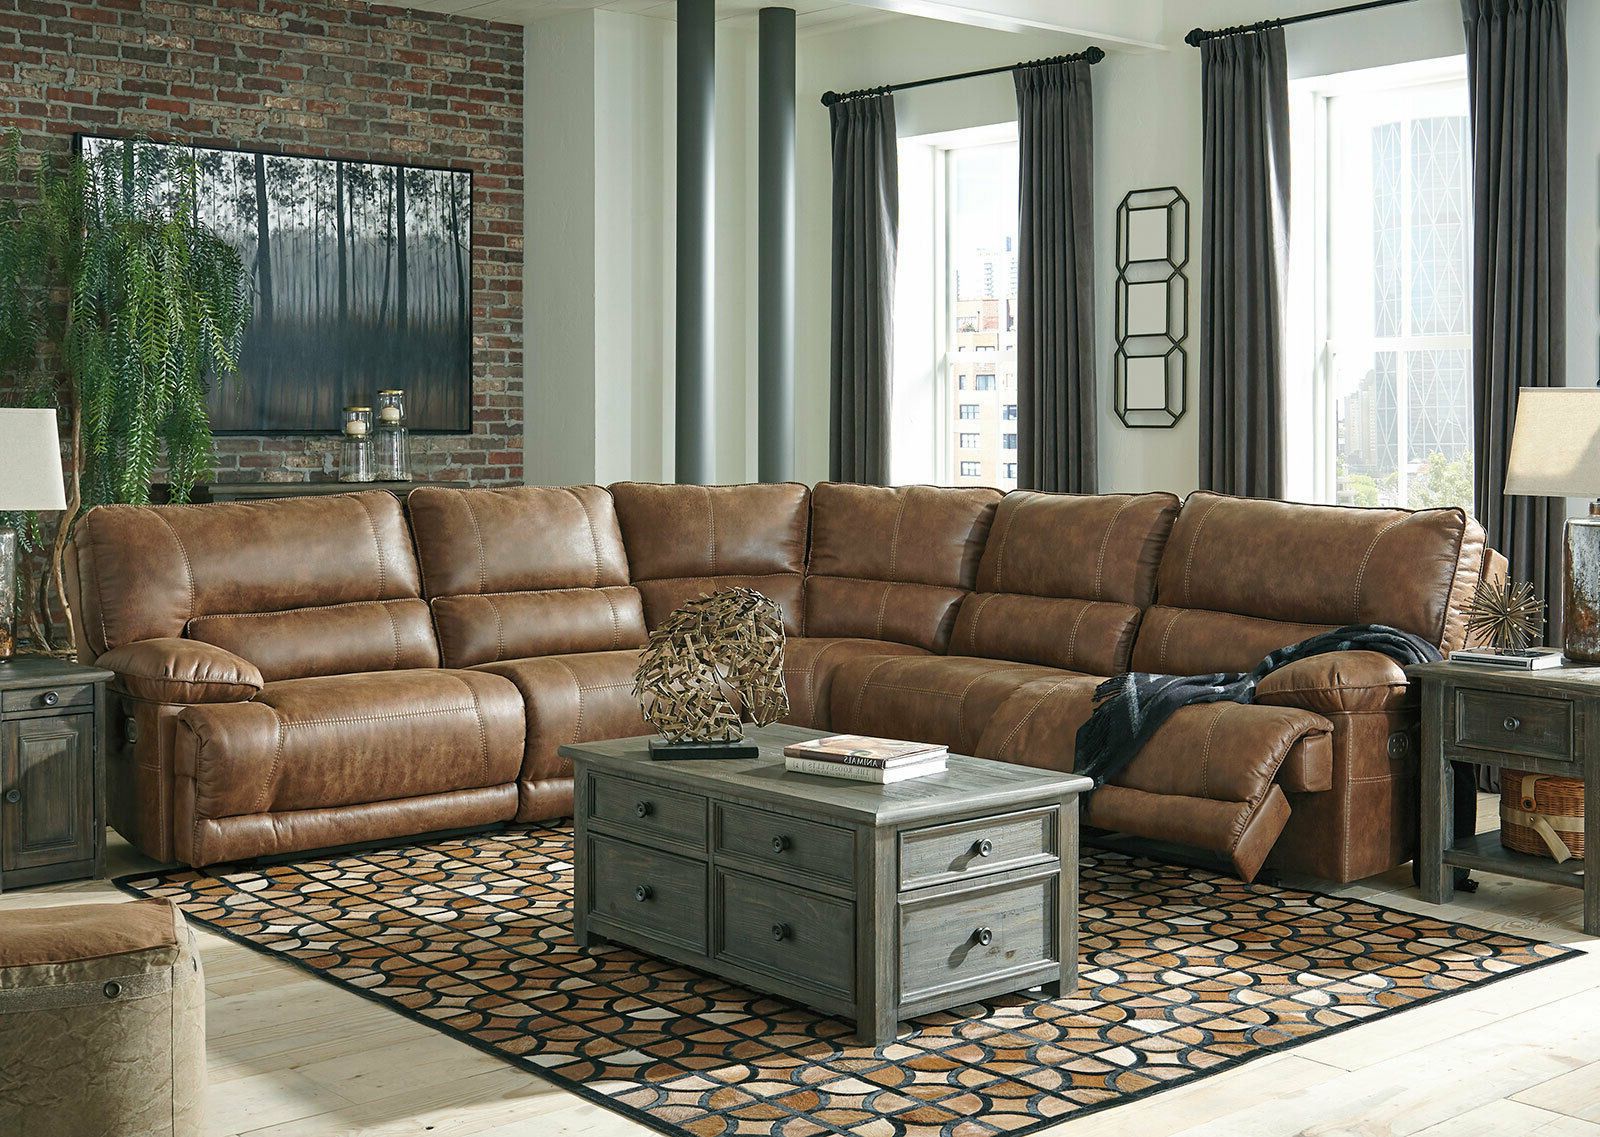 Hamburg 5pcs Sectional Living Room Brown Faux Leather Power Reclining Pertaining To Best And Newest Faux Leather Sectional Sofa Sets (View 4 of 15)